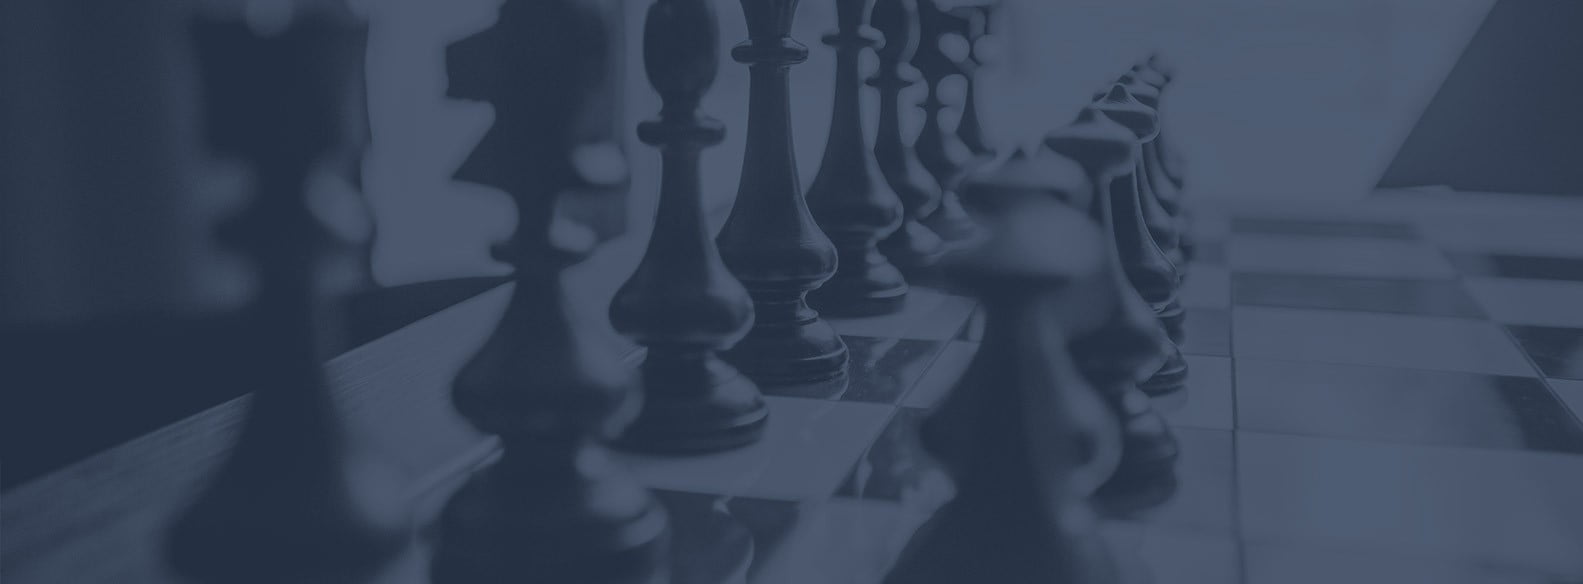 Chess pieces representing ensuring profitability for renewable energy companies with due diligence